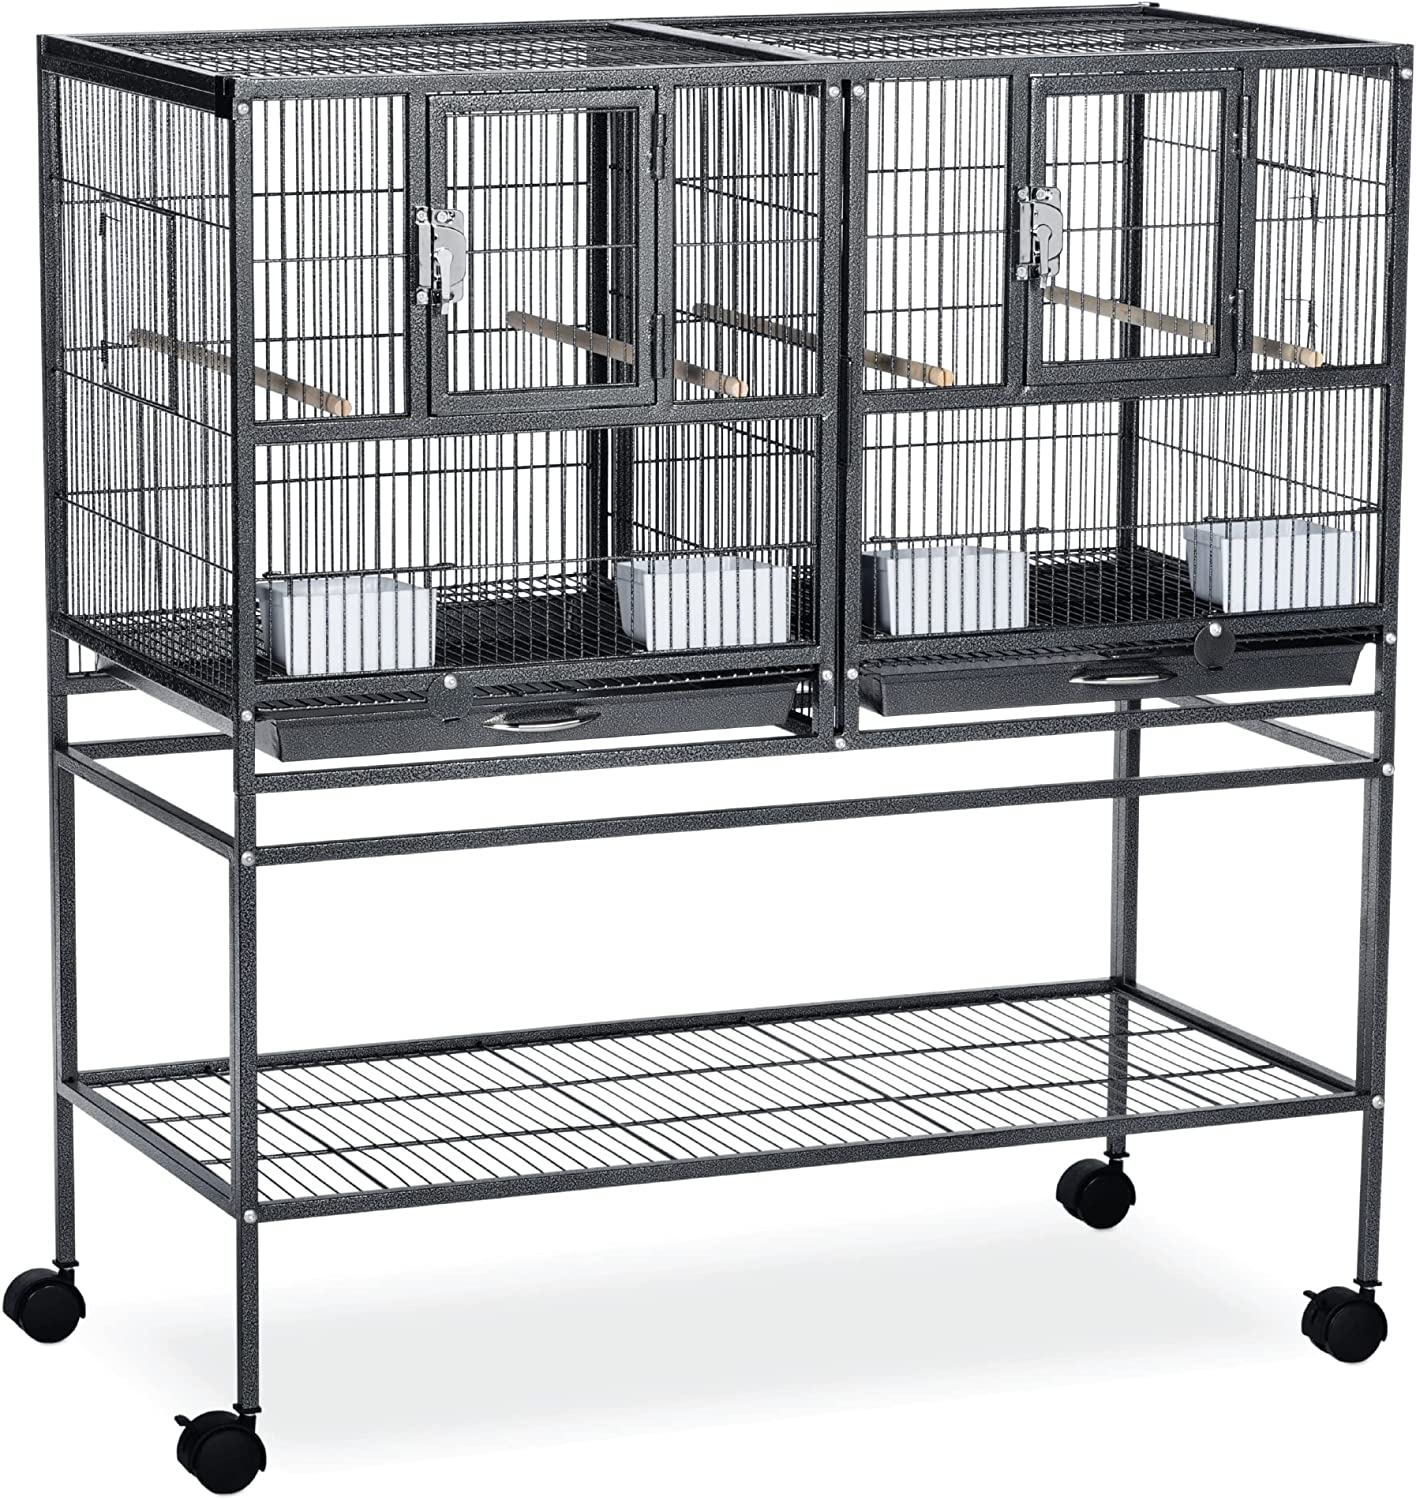 Prevue Pet Products F070 Hampton Deluxe Divided Breeder Cage with Stand